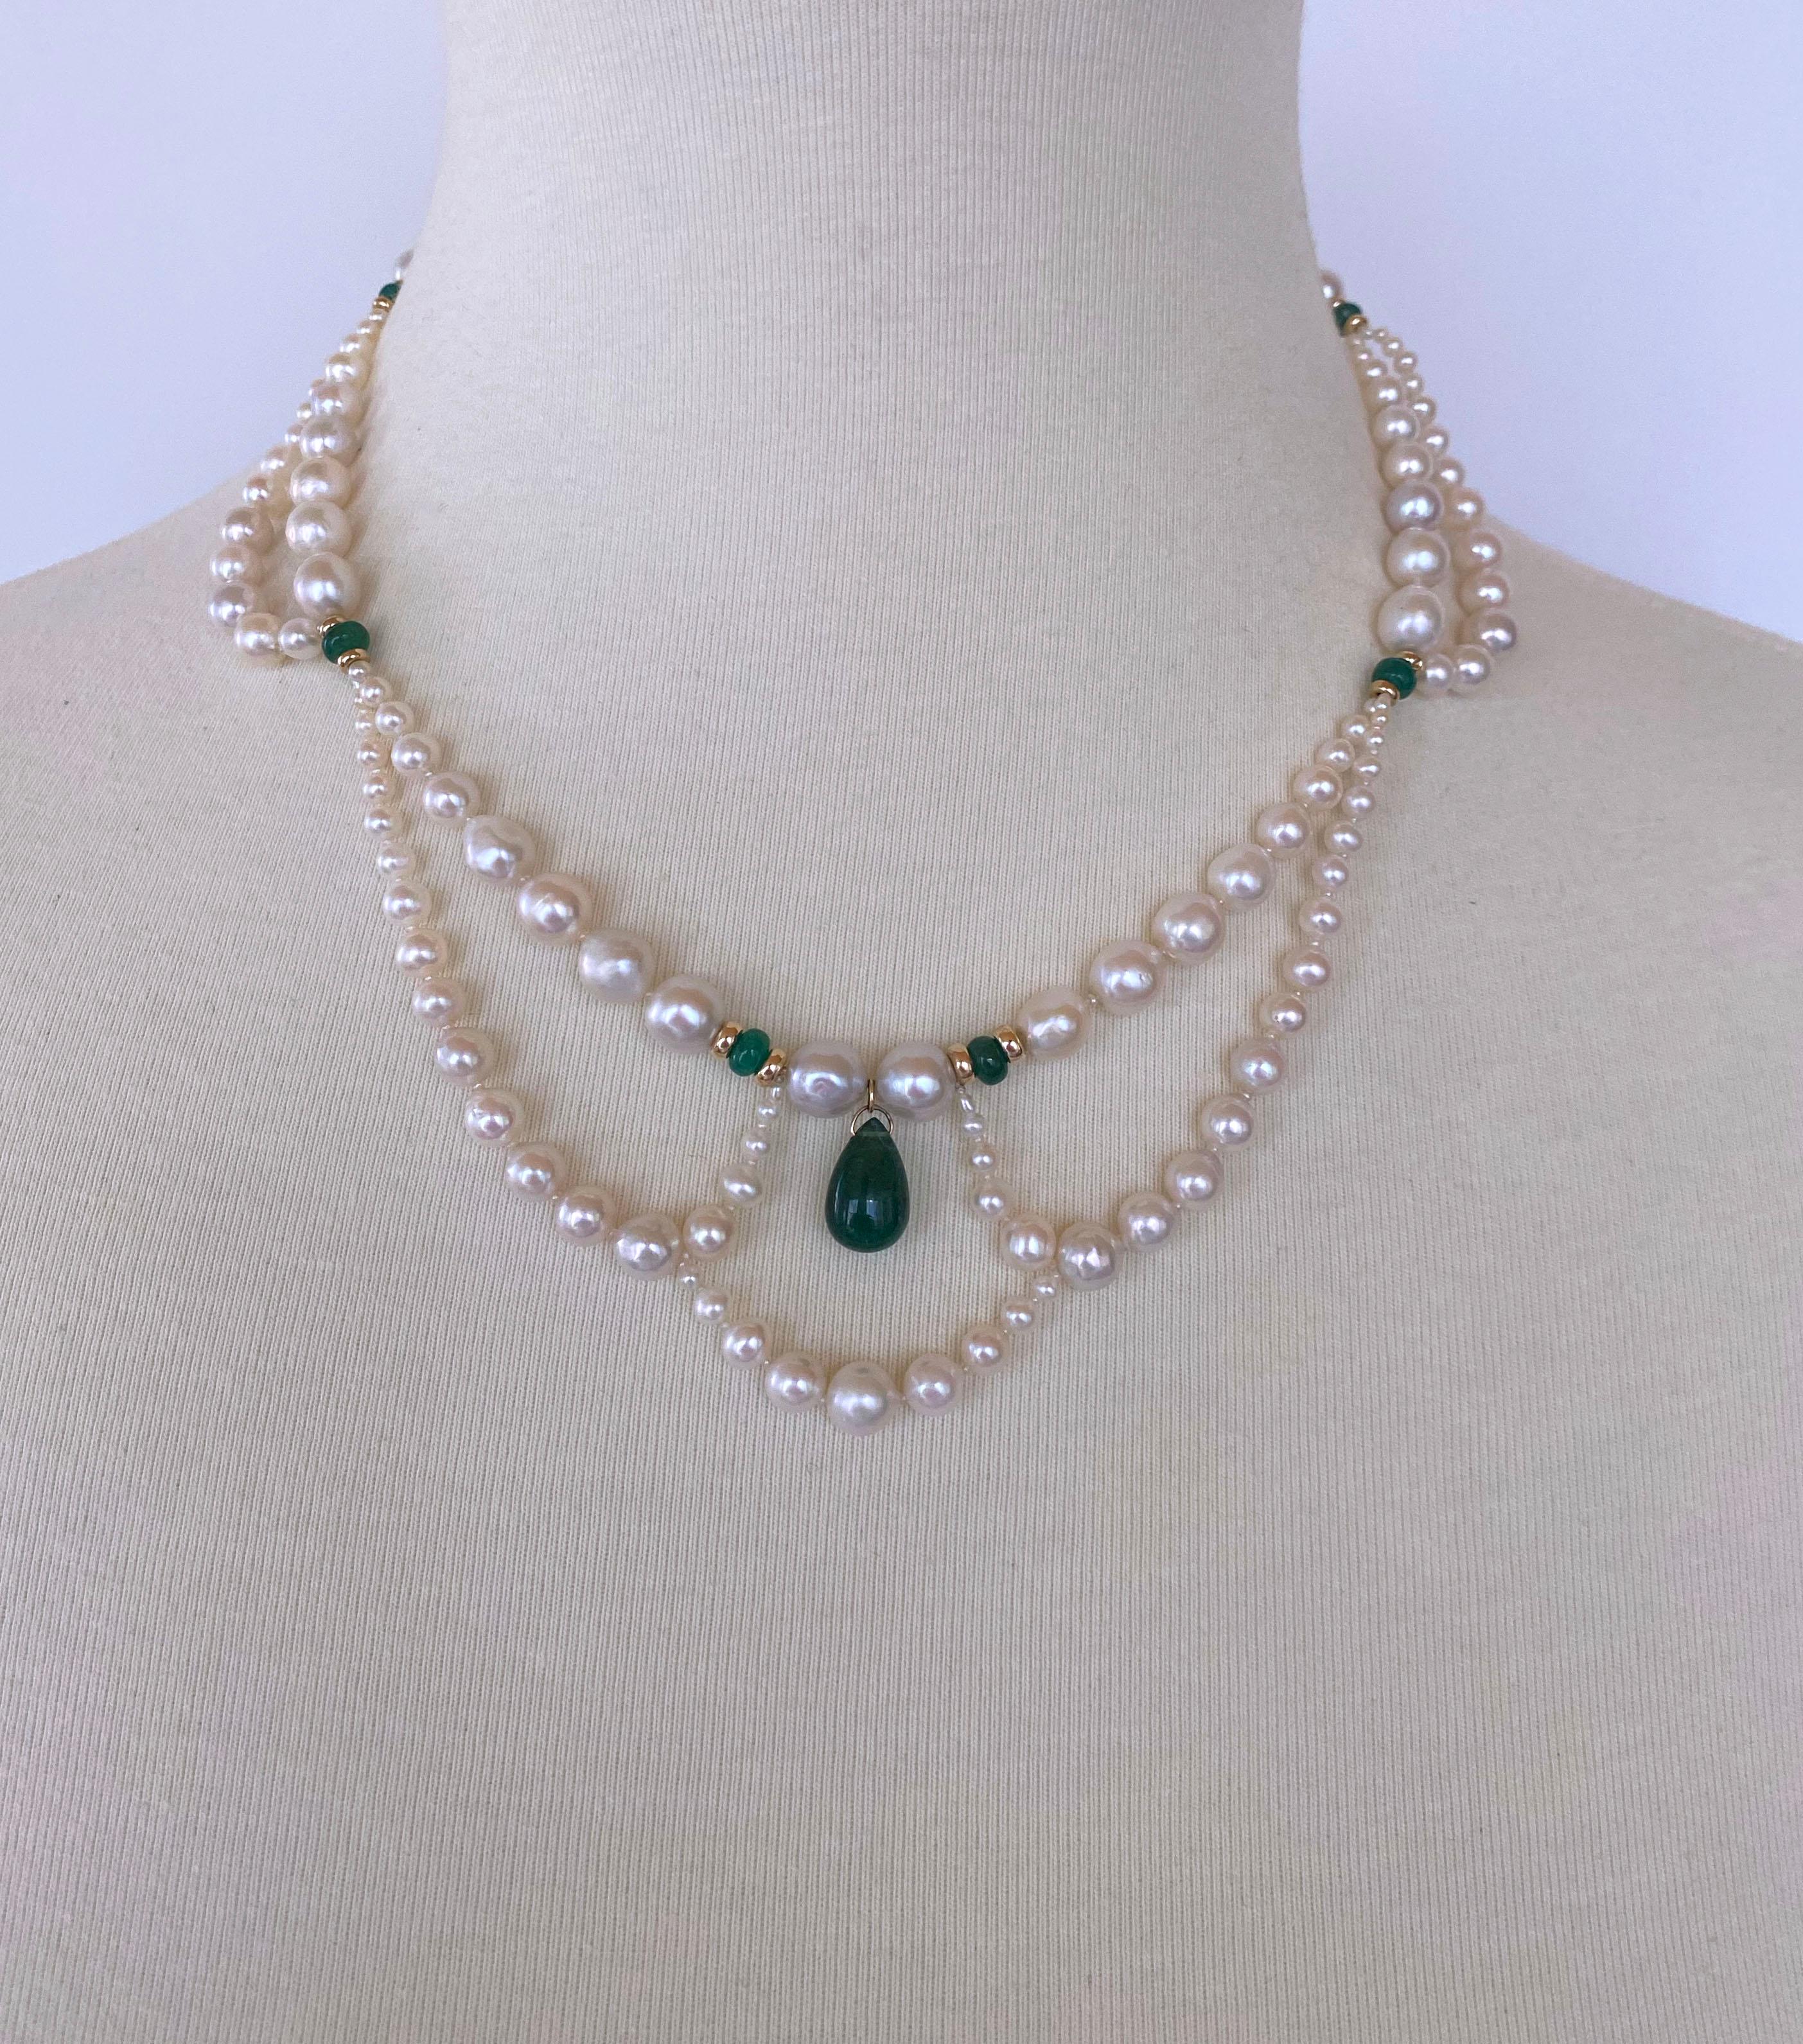 Bead Marina J. Graduated & Draped Pearl, Emerald Necklace with 14K Yellow Gold